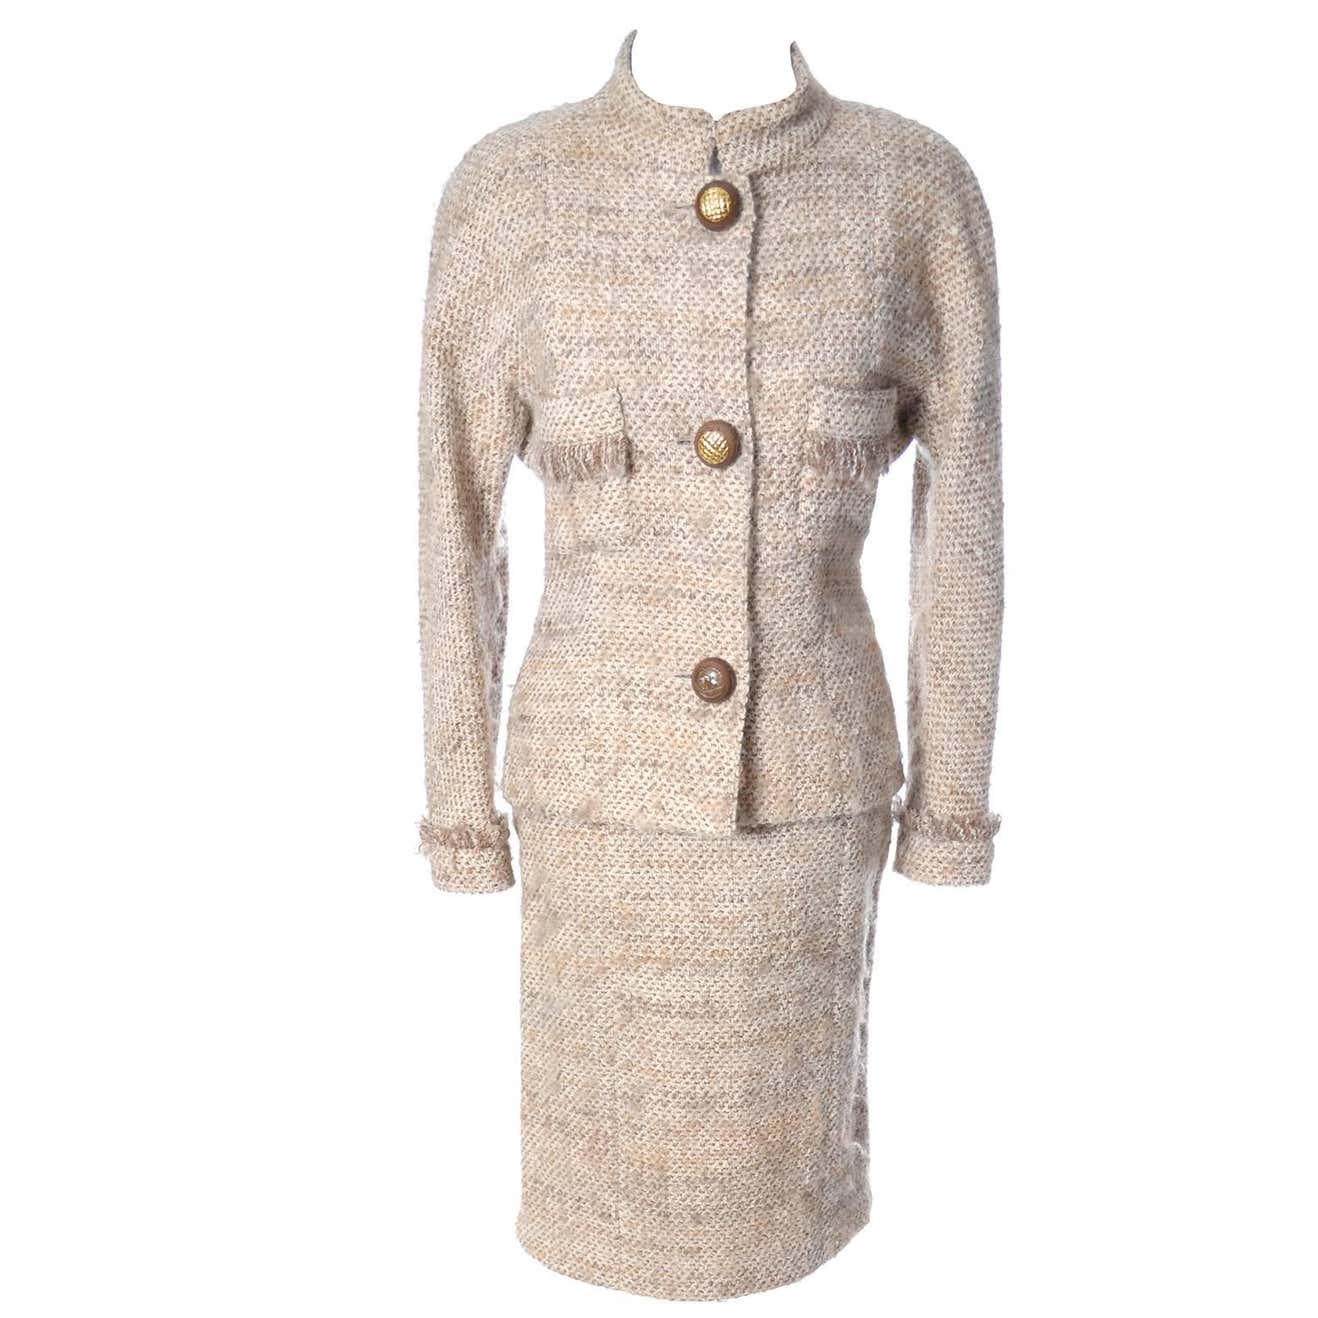 Documented F/W 1988 Vintage Chanel Boutique Skirt Suit Boucle Wool ...